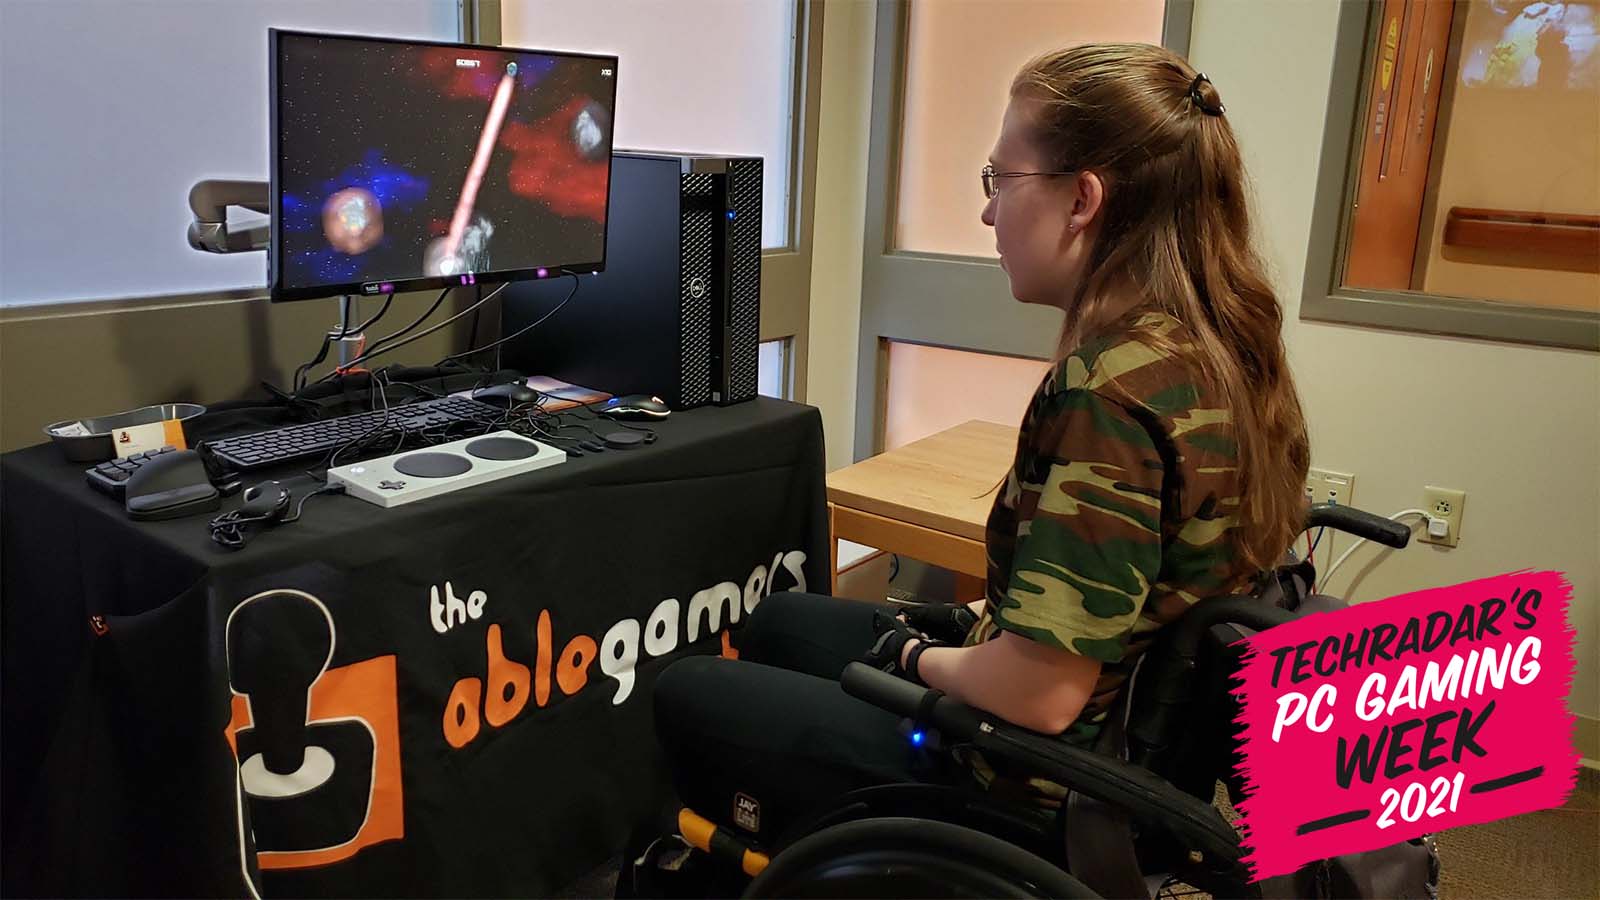 AbleGamers - Combating Social Isolation Through Play